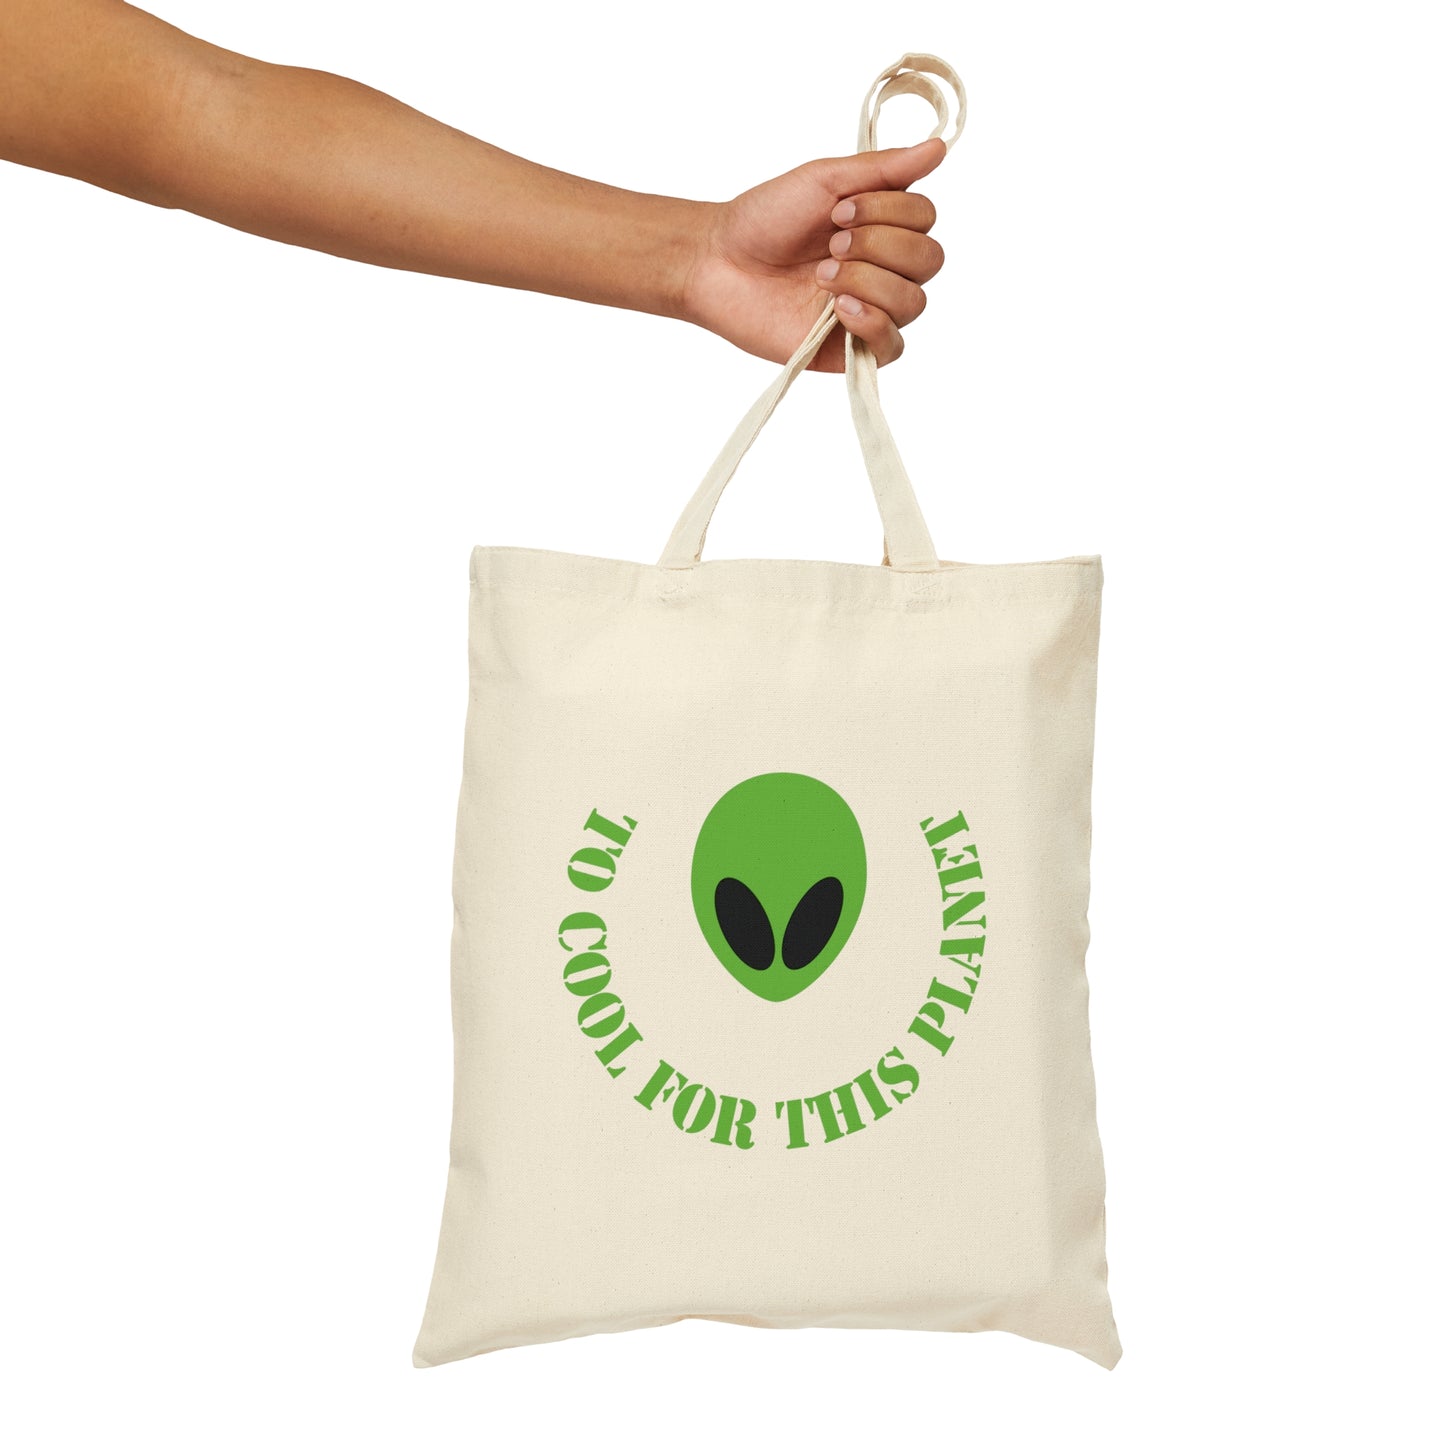 Too Cool For This Planet Funny Humor Aliens Quotes UFO TV Series Canvas Shopping Cotton Tote Bag